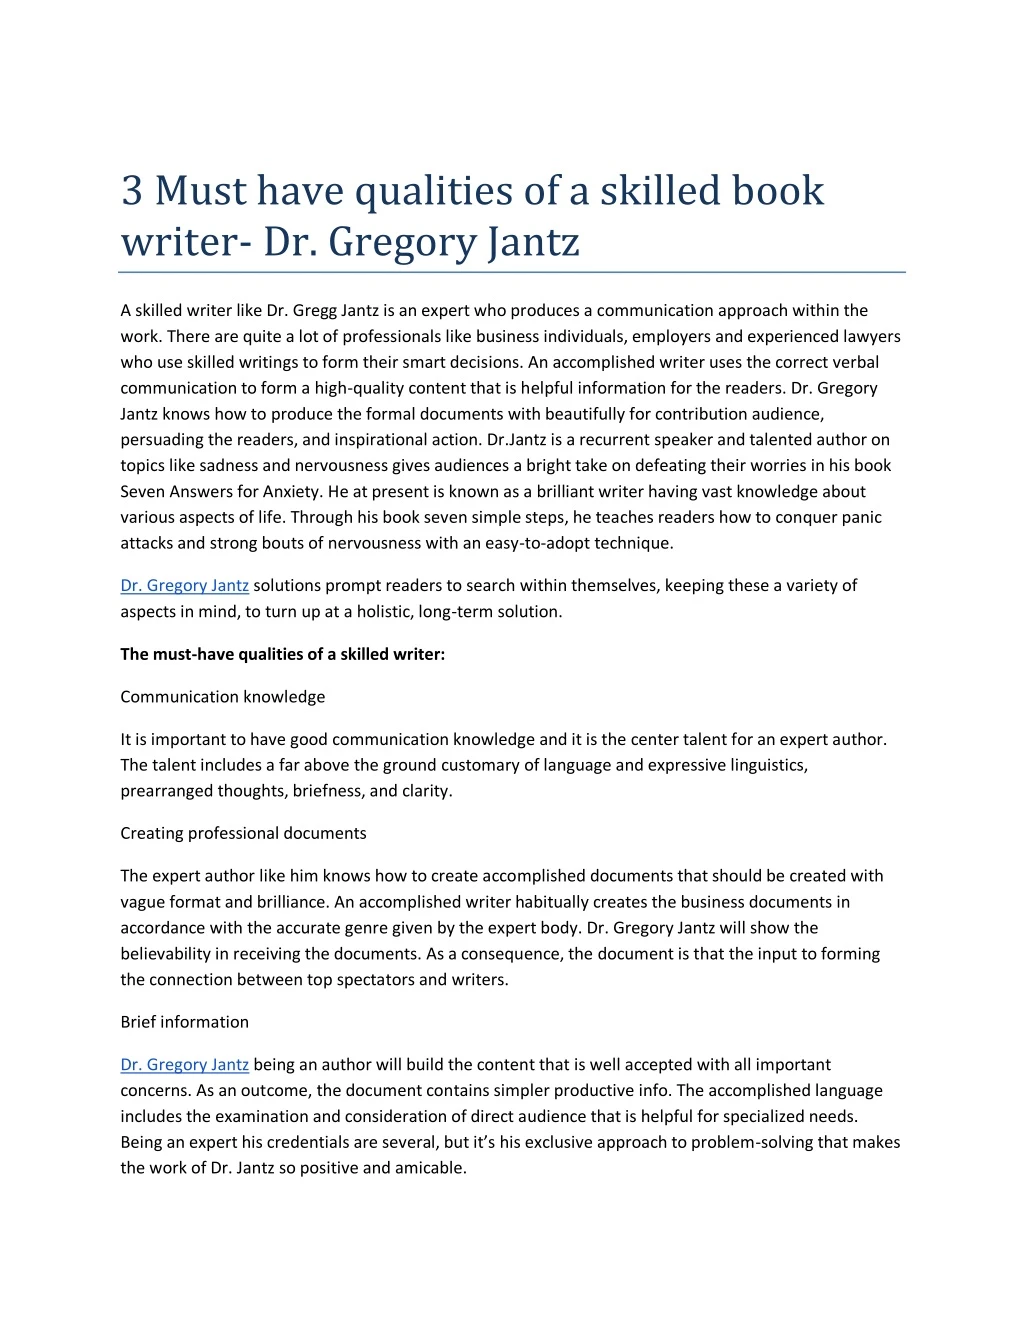 3 must have qualities of a skilled book writer